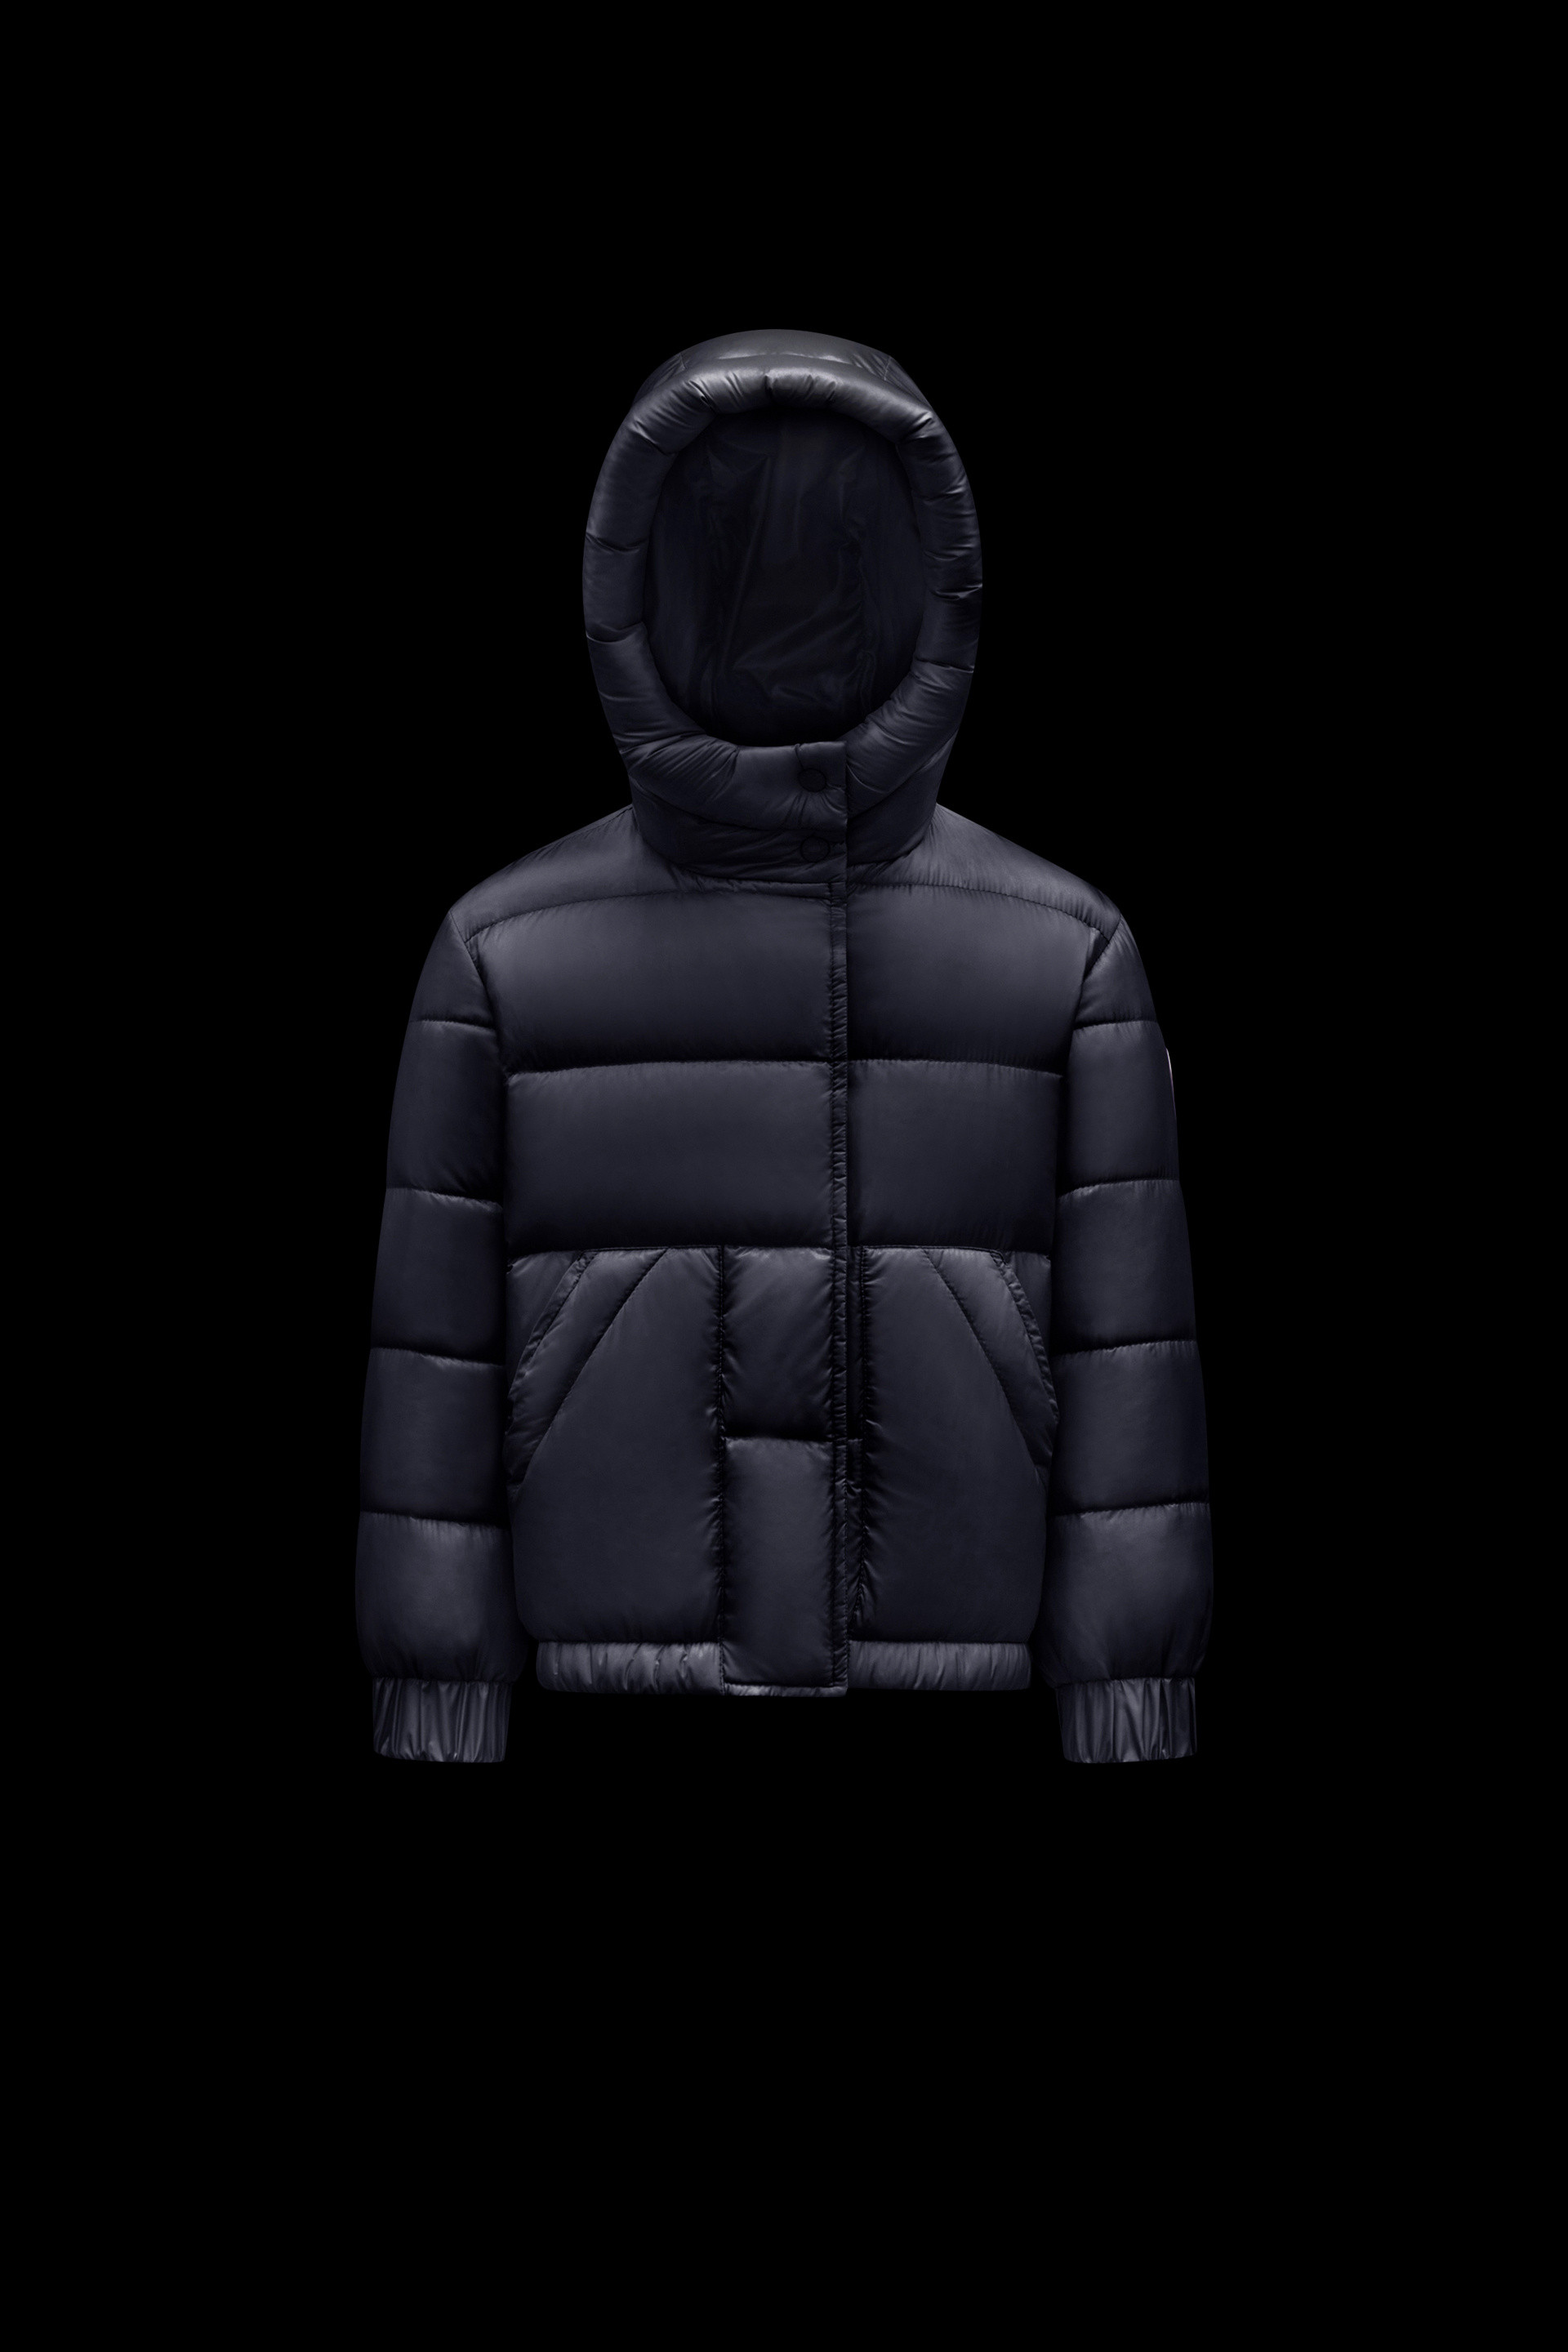 Girls' Clothing - Jackets, Dresses, Hoodies & Shoes | Moncler US